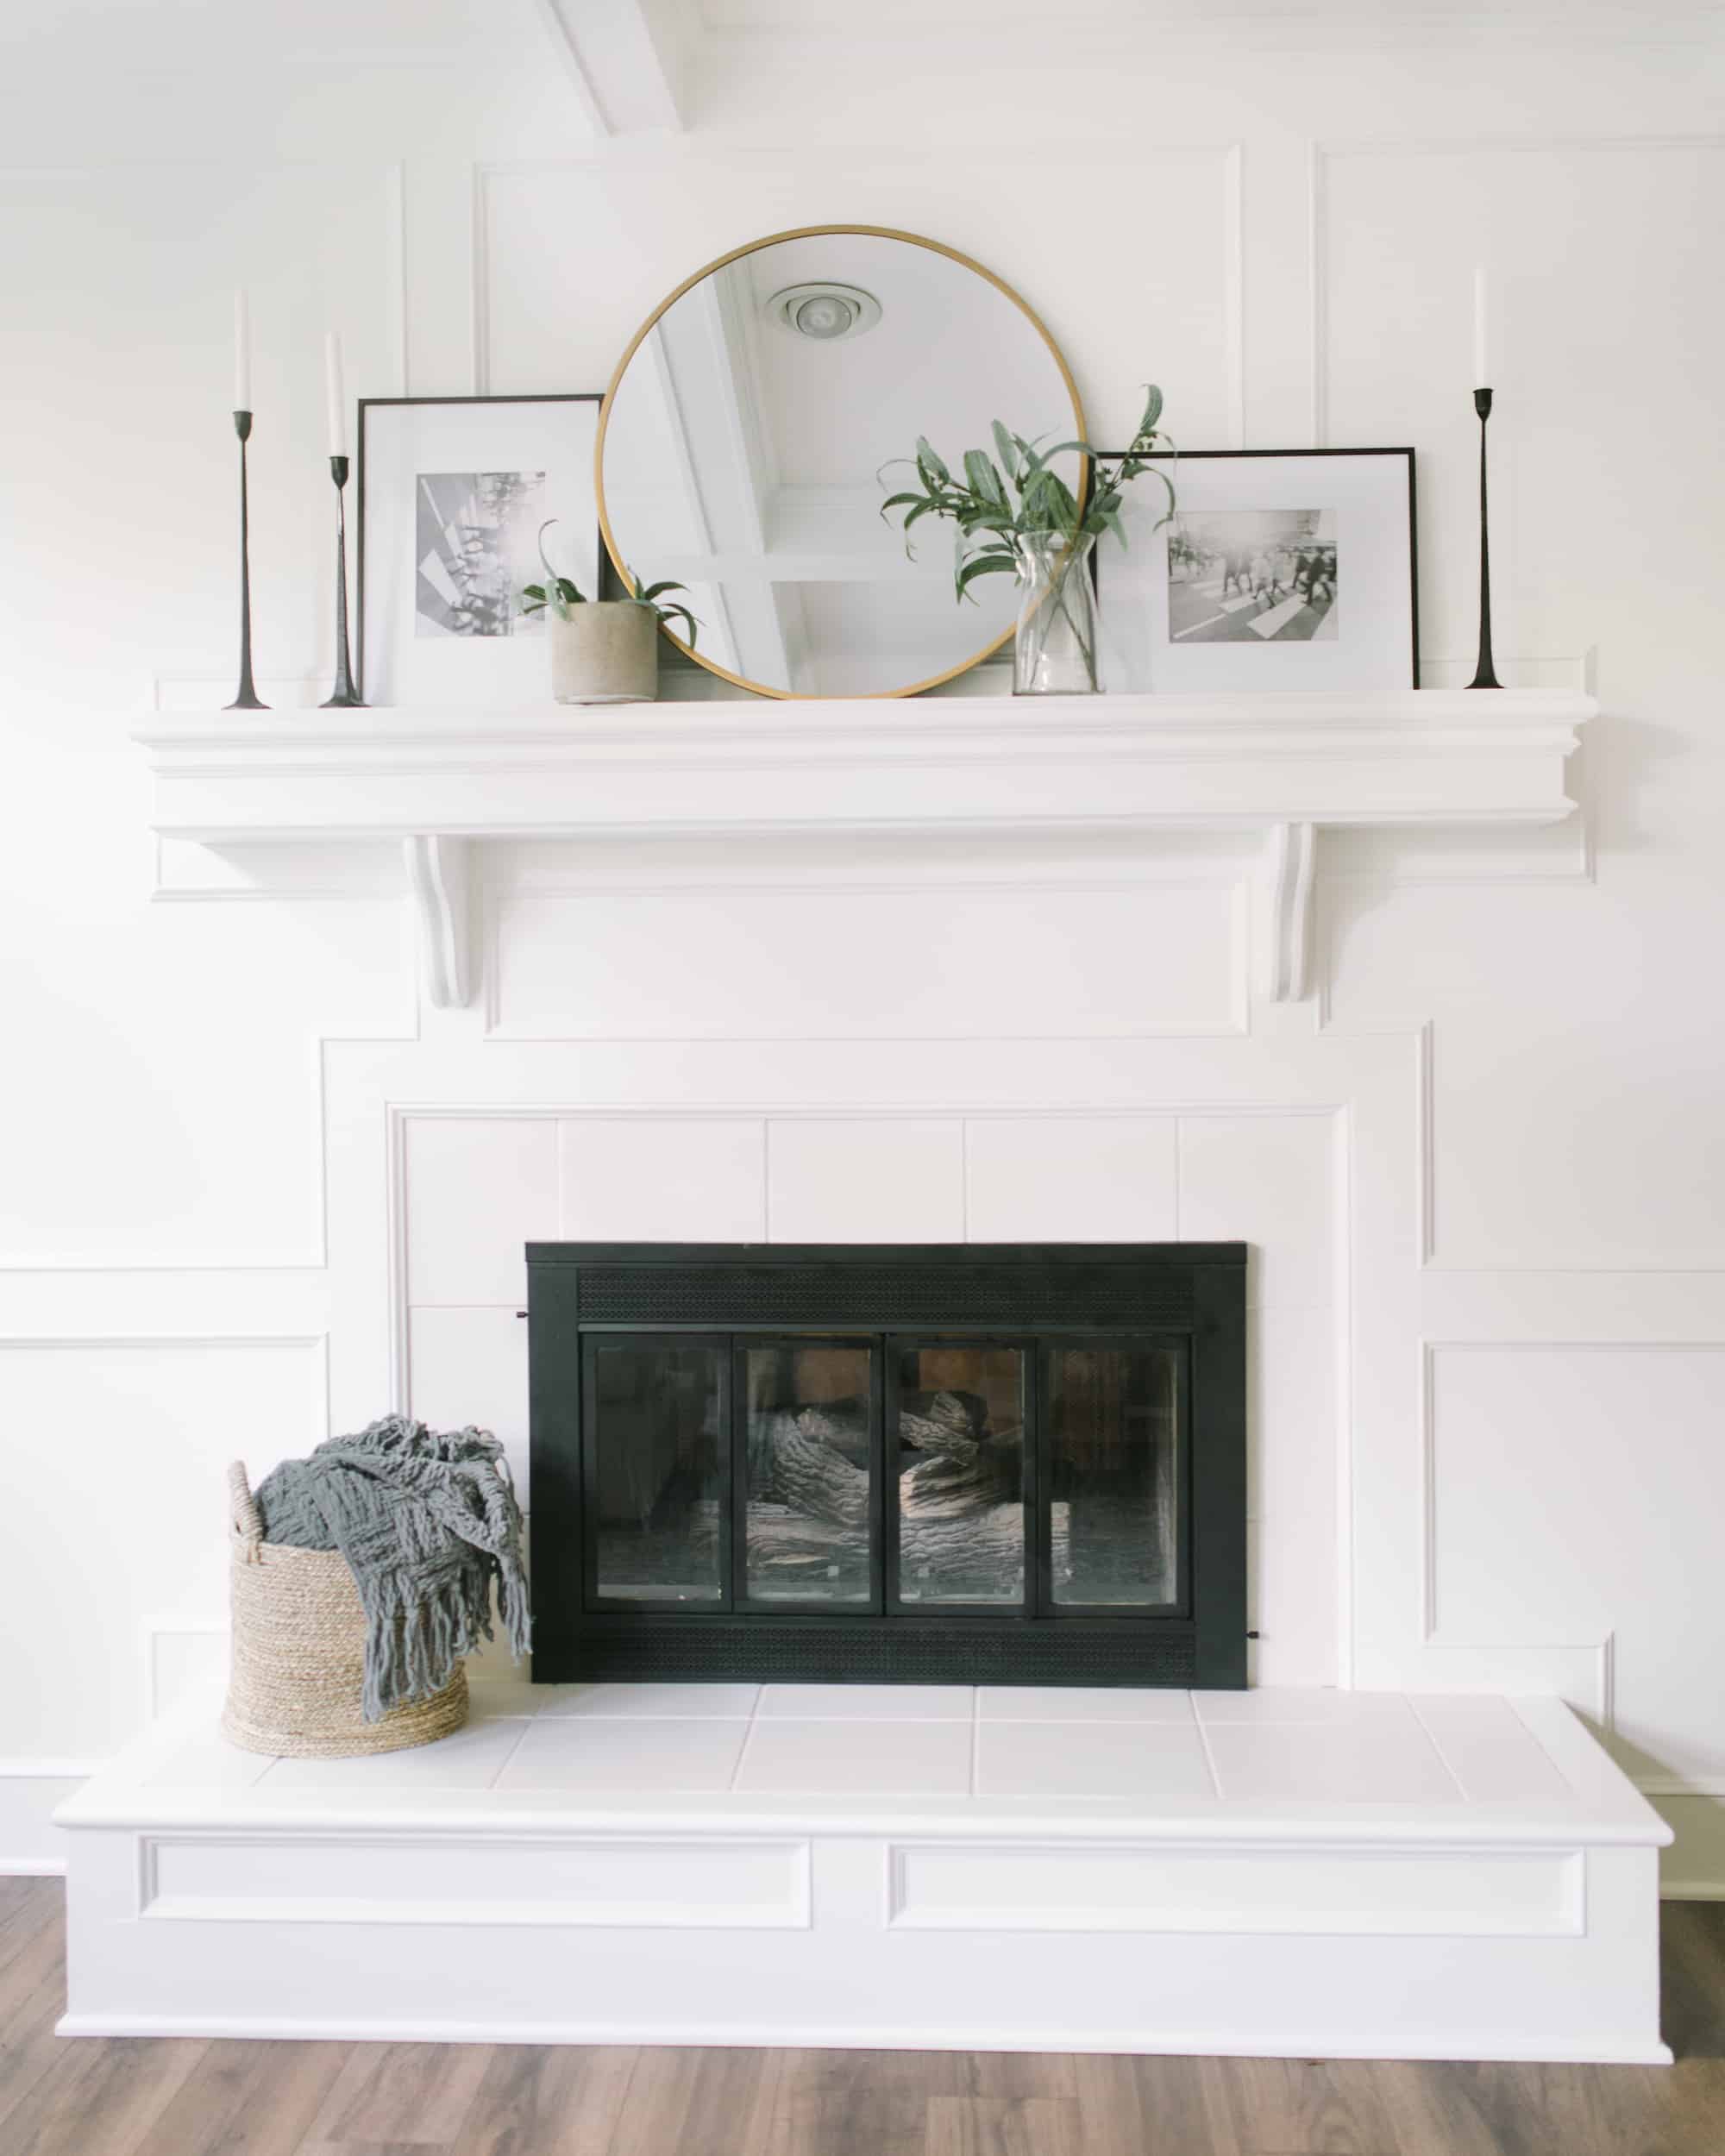 15 Diy Fireplace Surrounds Awesome Ideas - Diy Electric Fireplace Surround Ideas